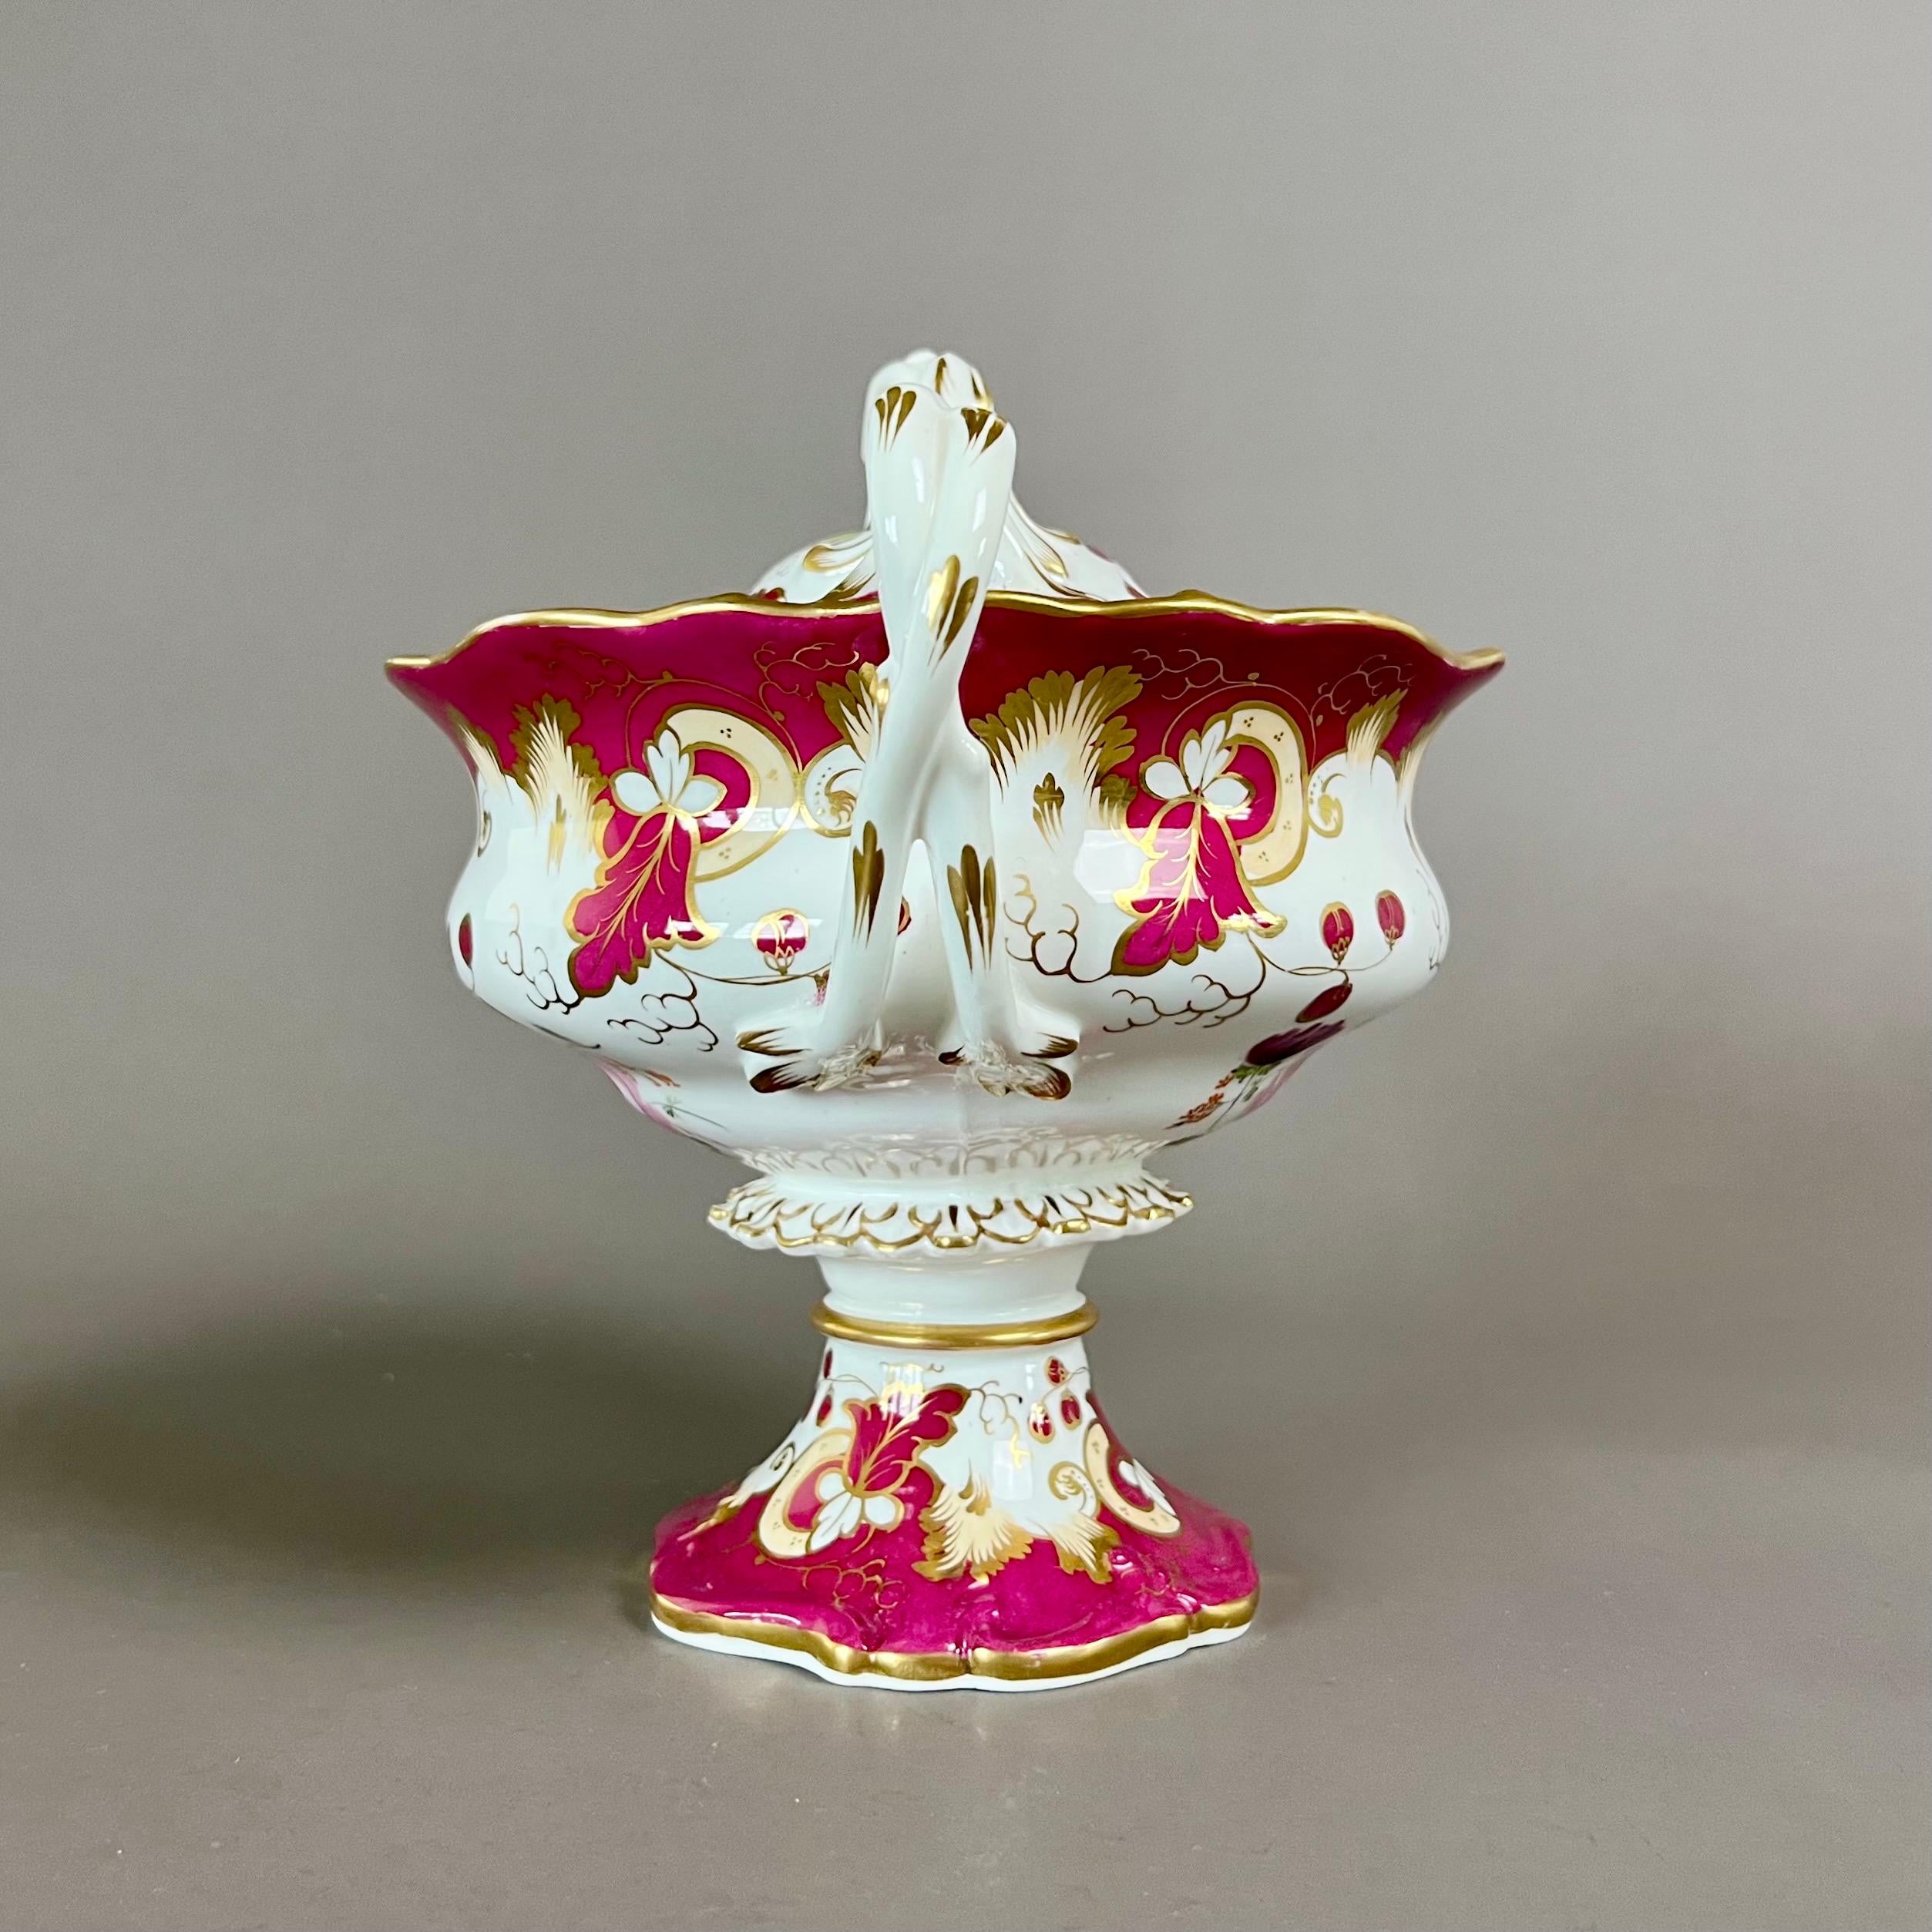 English Samuel Alcock Footed Porcelain Sauce Tureen, Maroon with Flower Sprays, ca 1842 For Sale